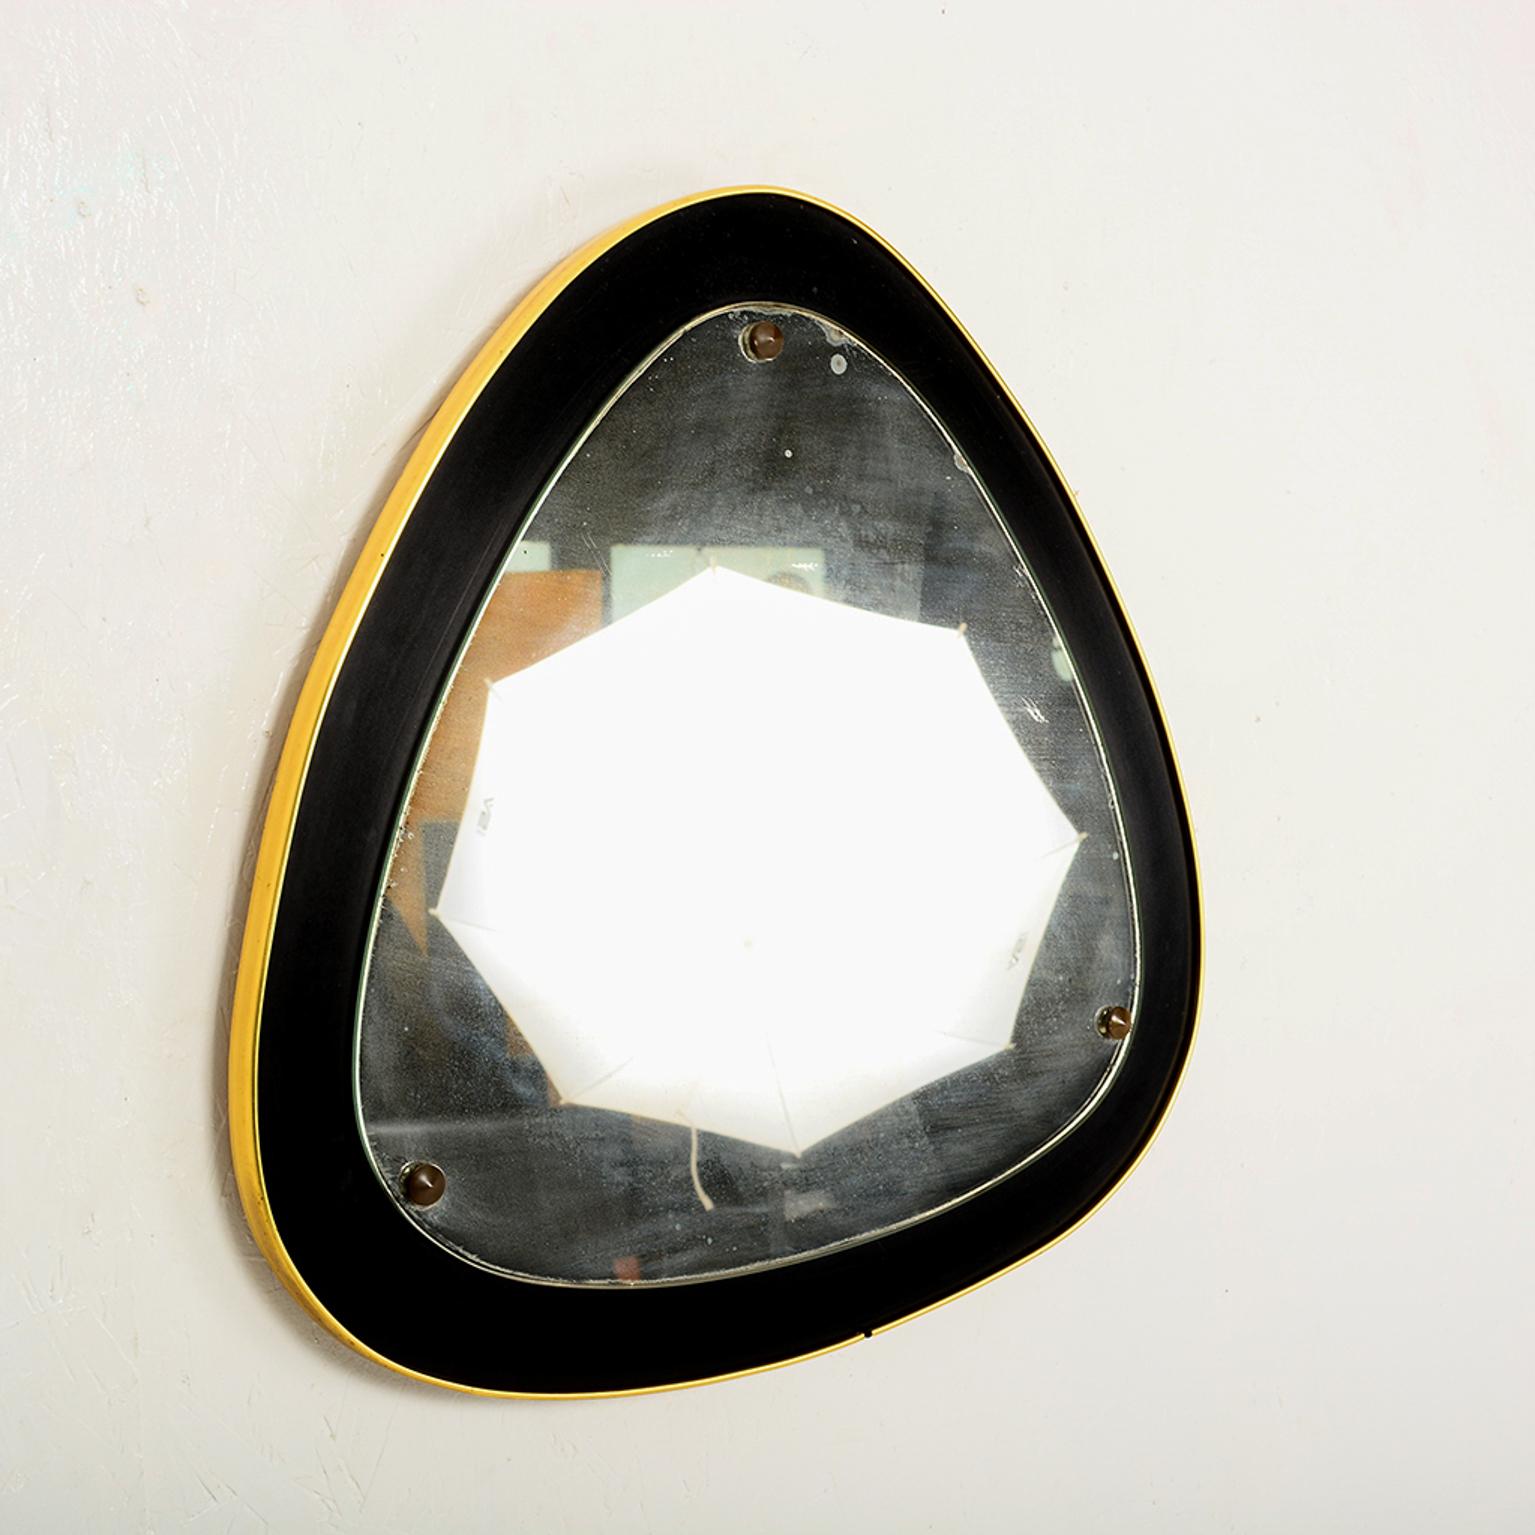 Mirror
Curvilinear Italian Wall Mirror brass & ebonized wood.
Made in Italy, midcentury modern 1950s.
Original vintage unrestored condition. Note small crack on one of the corners
See images.
Dimensions: H 22.5 in. x W 22.5 in. x D 1 in.
LA